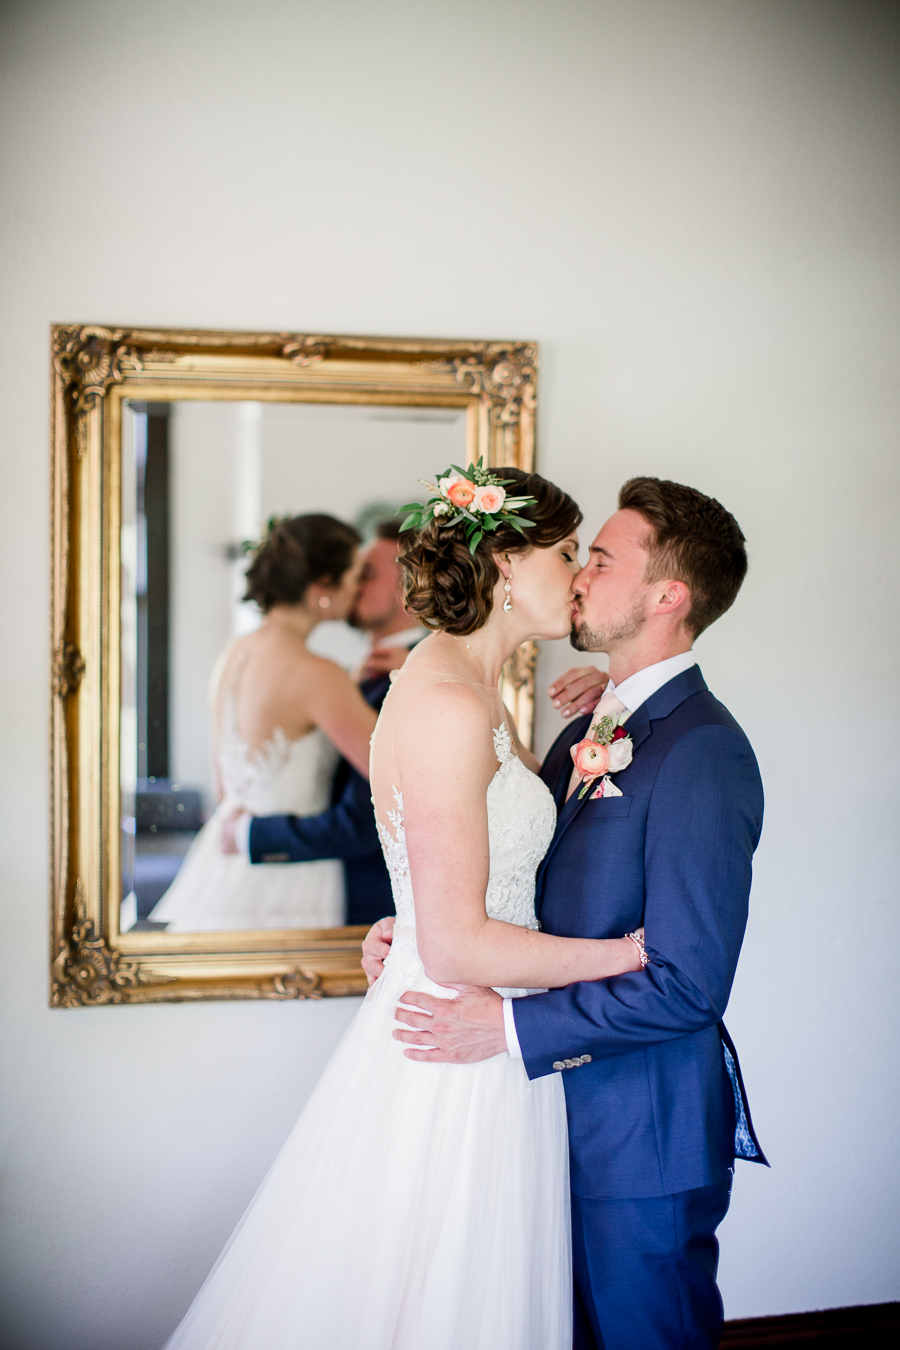 Kissing each other in front of mirror at this North Carolina Elopement by Knoxville Wedding Photographer, Amanda May Photos.